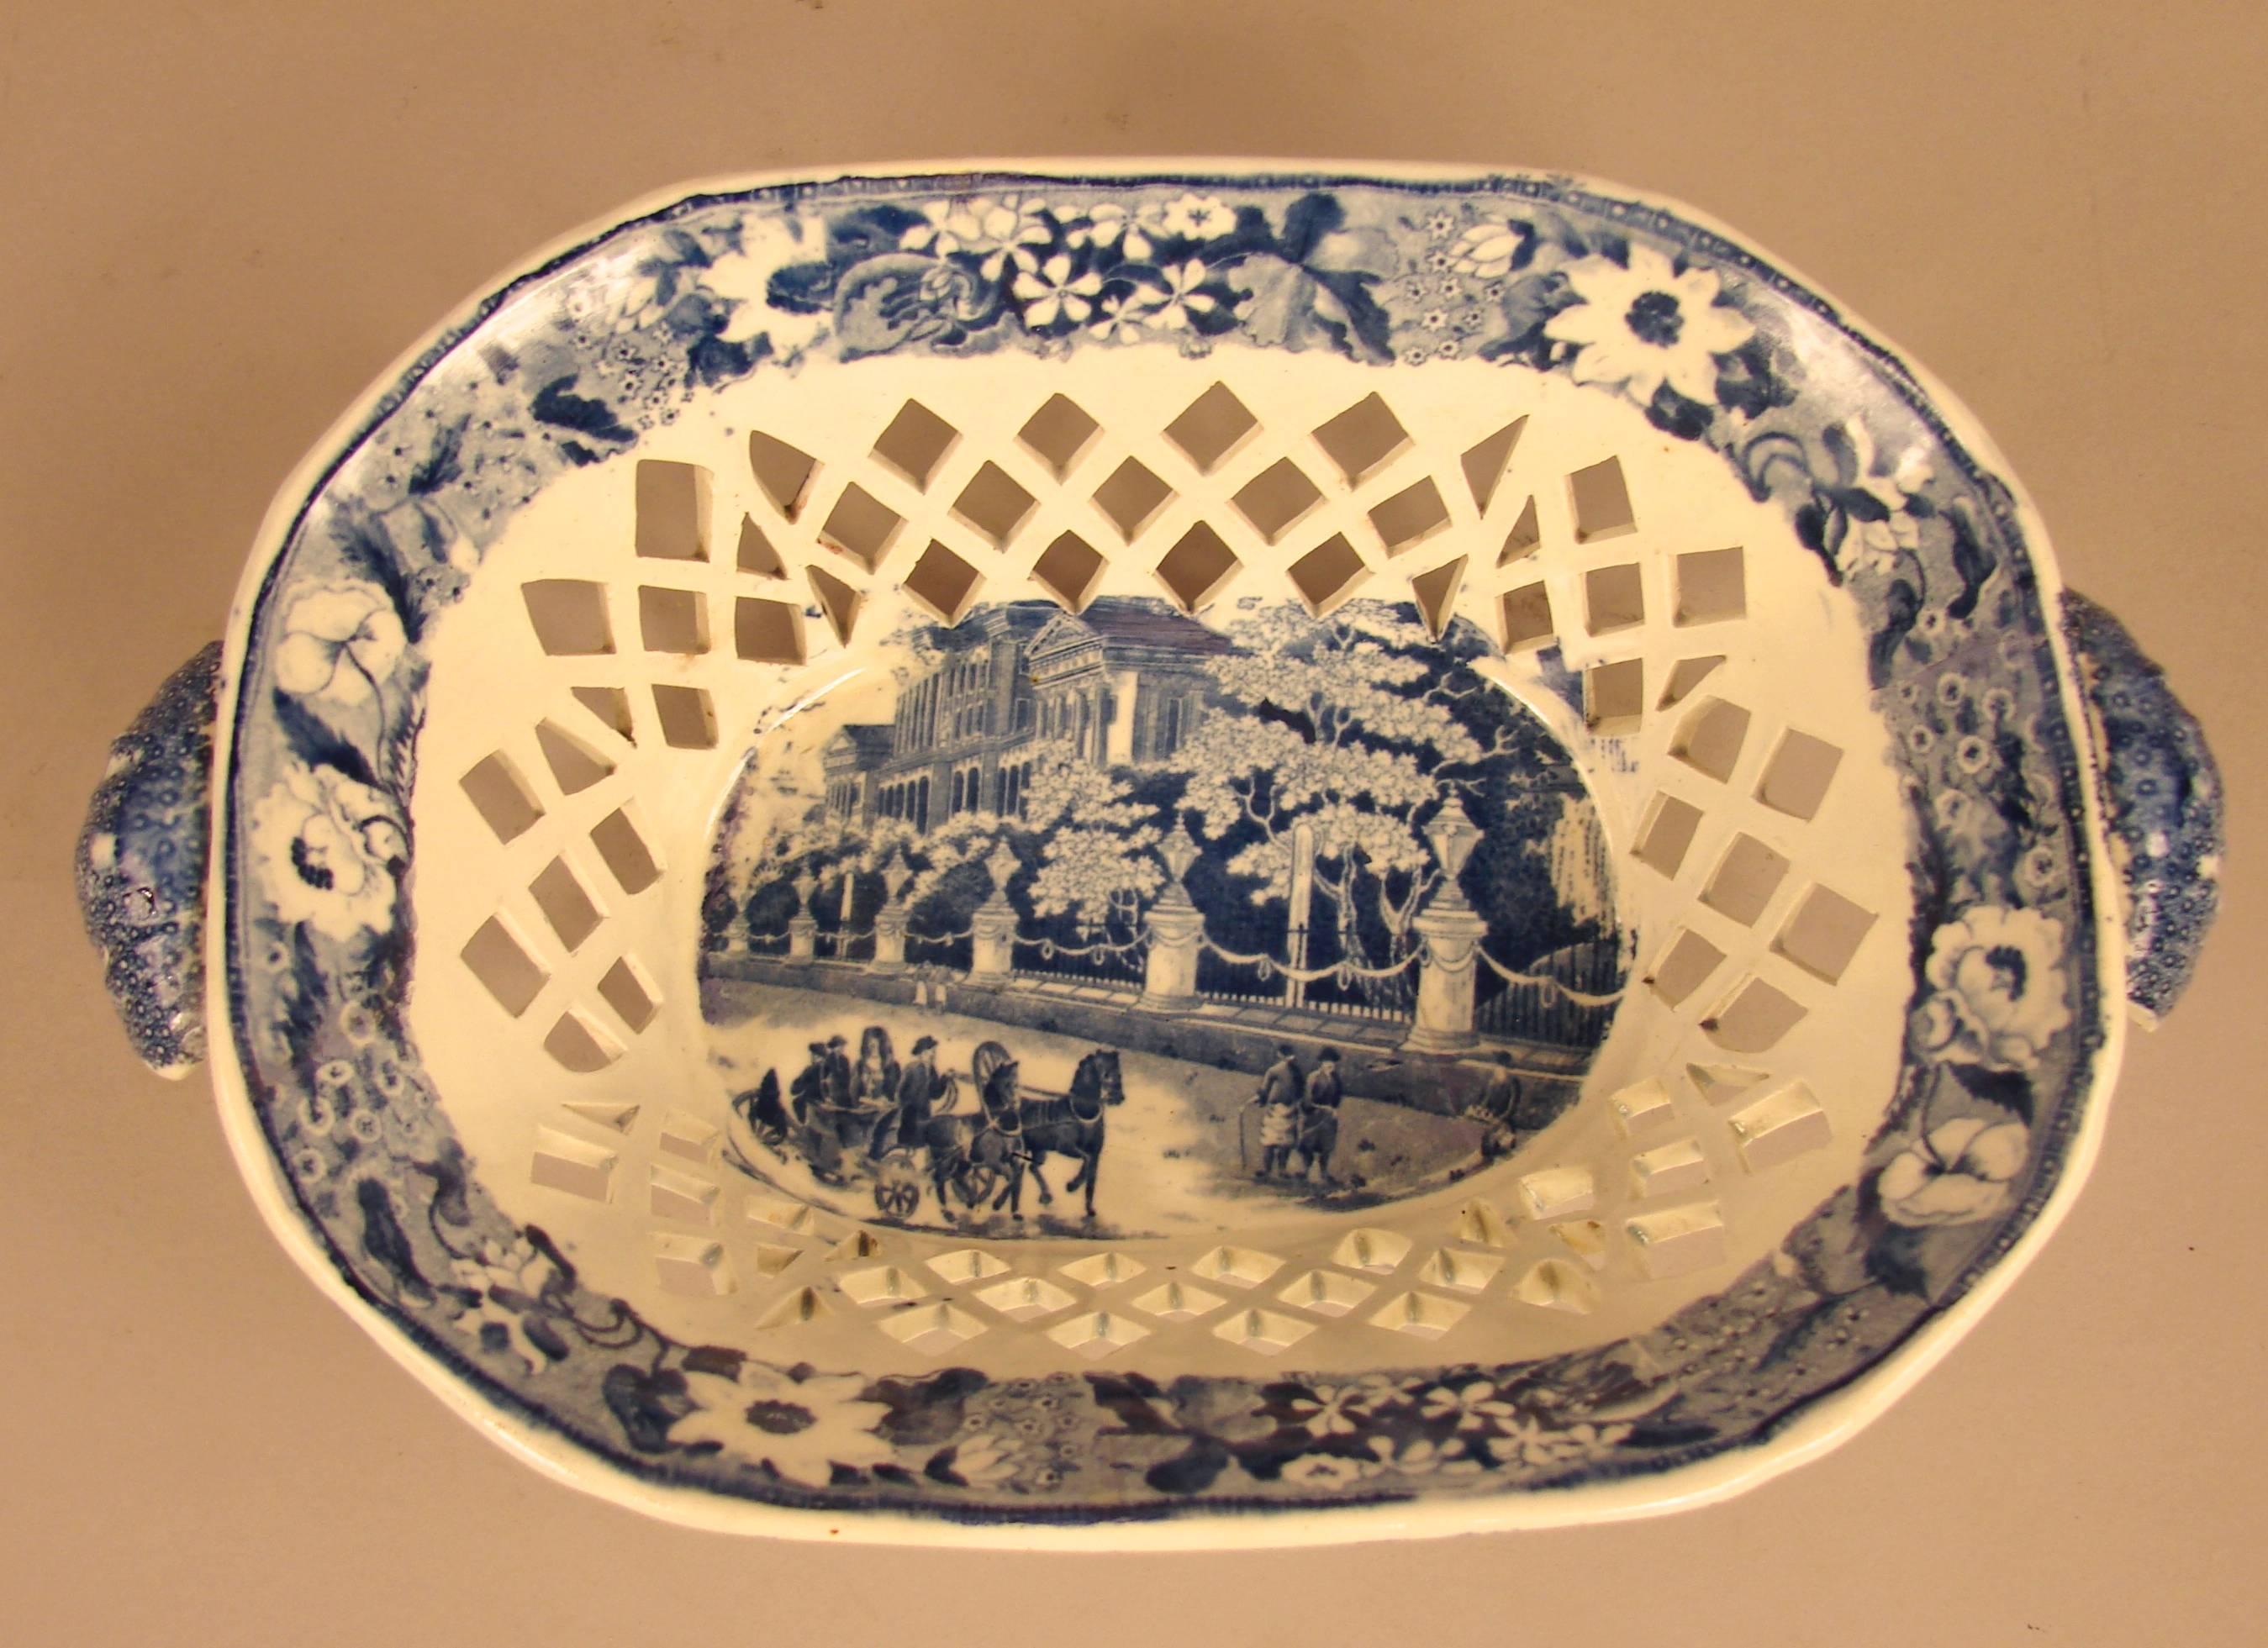 English Staffordshire blue transferware reticulated basket with matching under plate, circa 1840.